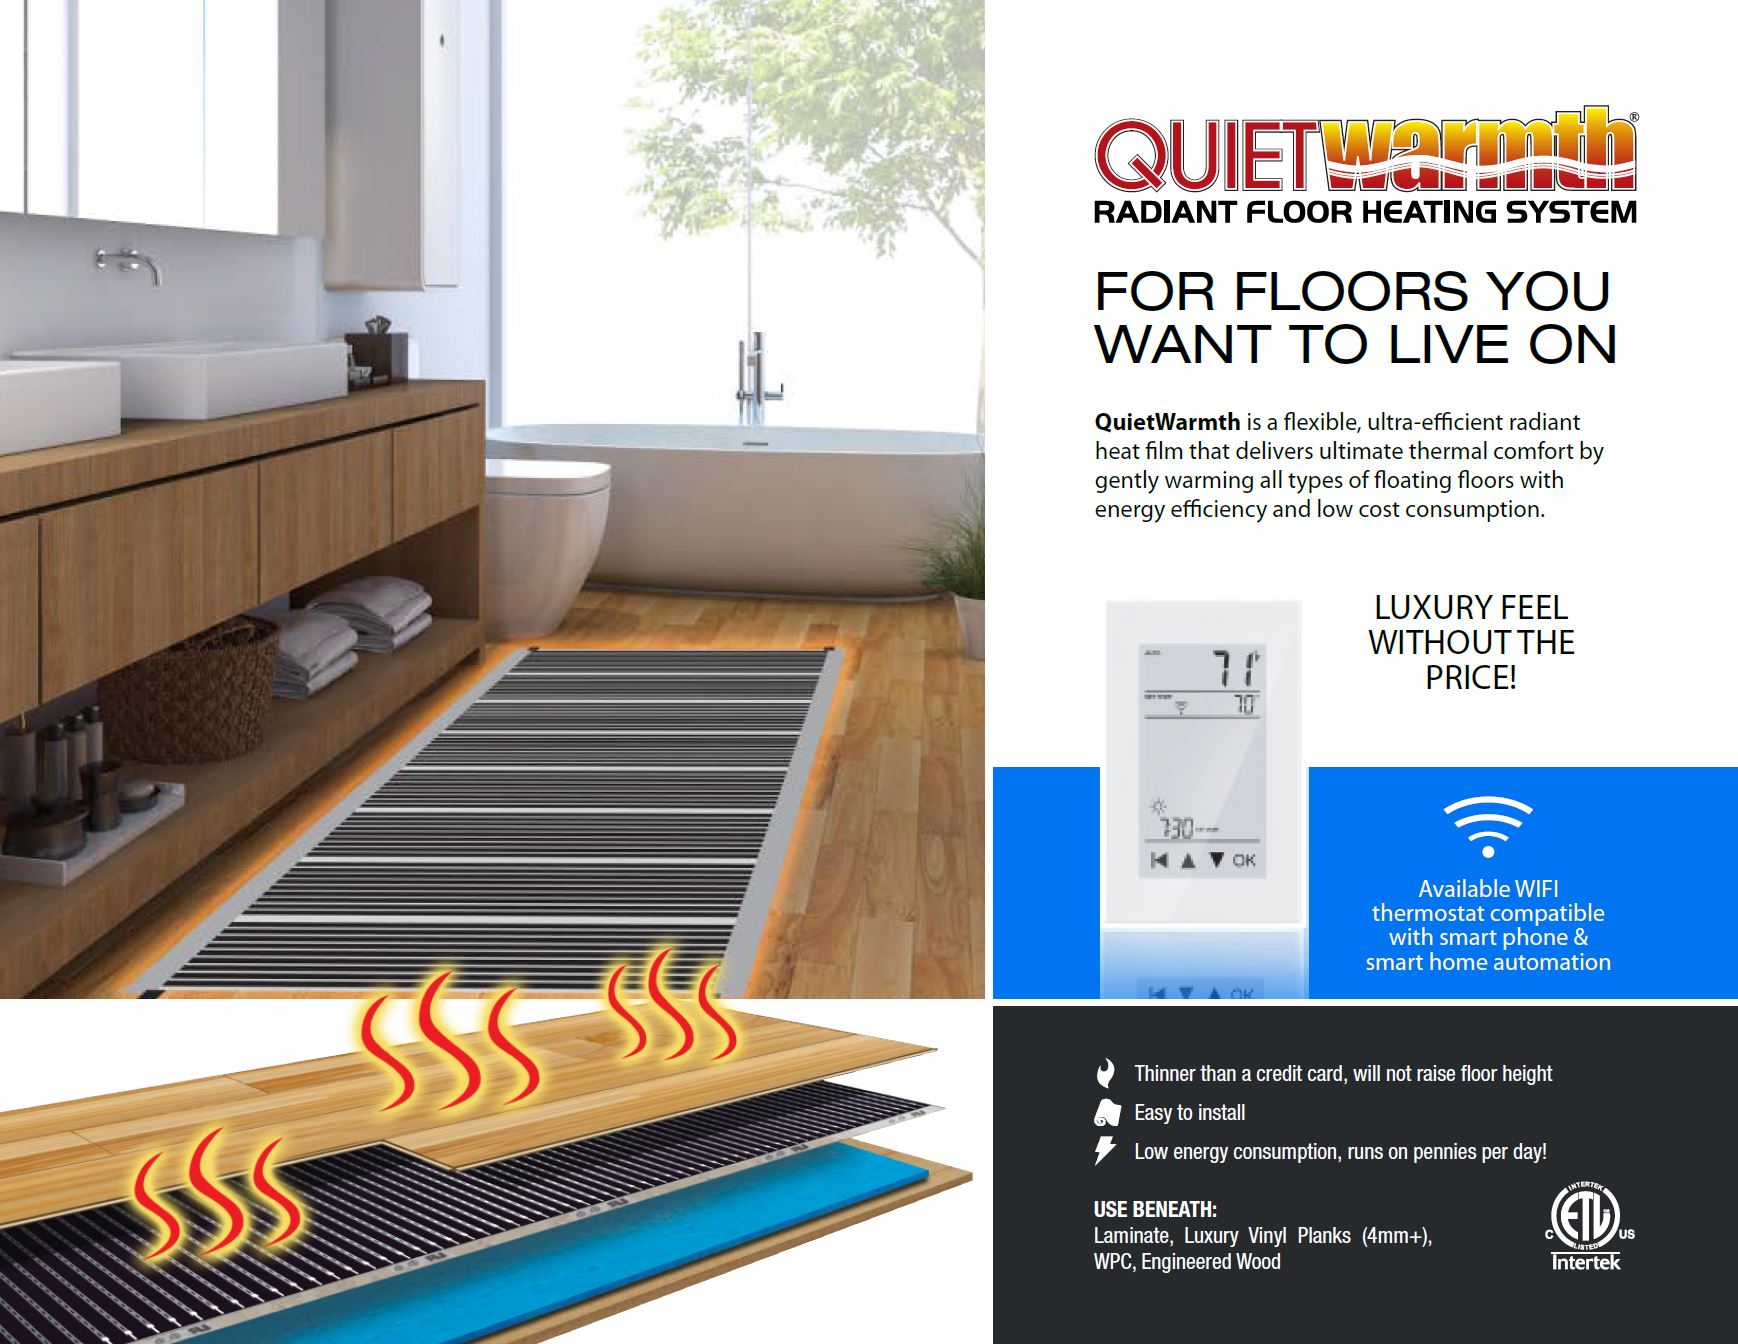 QuietWalk LV Luxury Vinyl, Laminate, or Wood Underlayment (Float, Glue, or  Nail) w/Vapor Barrier- Sound Reduction, Compression Resistant, Moisture  Protection 3'x33'4 Roll (Covers 100 sf) QW100LV 